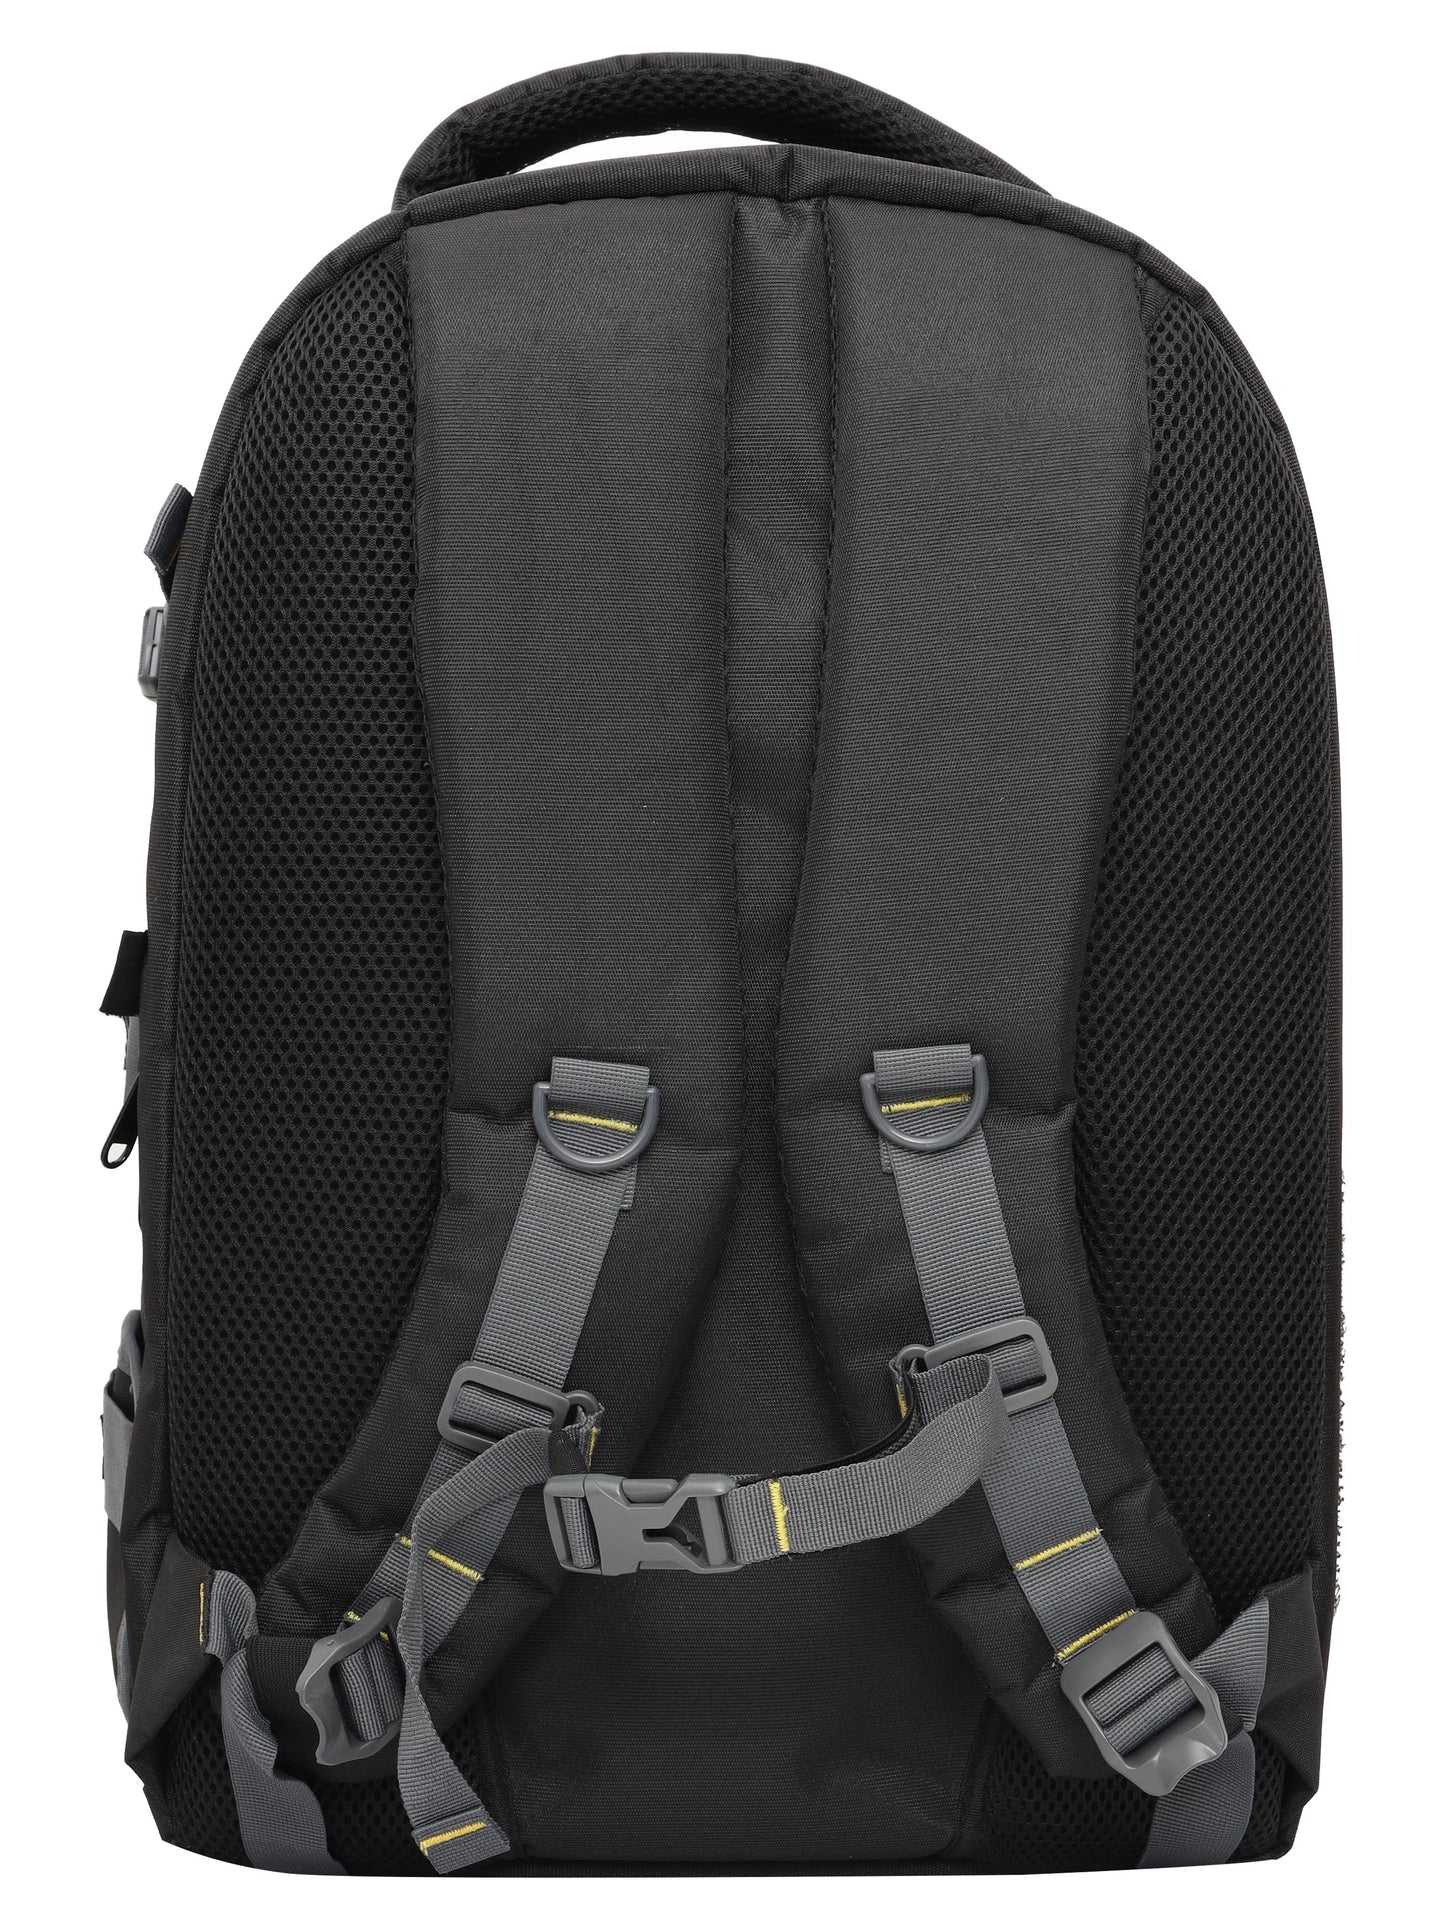 Back view of the G12 Target DSLR camera bag, highlighting its padded and adjustable shoulder straps, ergonomic back padding, and breathable mesh panel. The bag's thoughtful design ensures comfortable and supportive wear, allowing photographers to carry their gear for extended periods with ease.